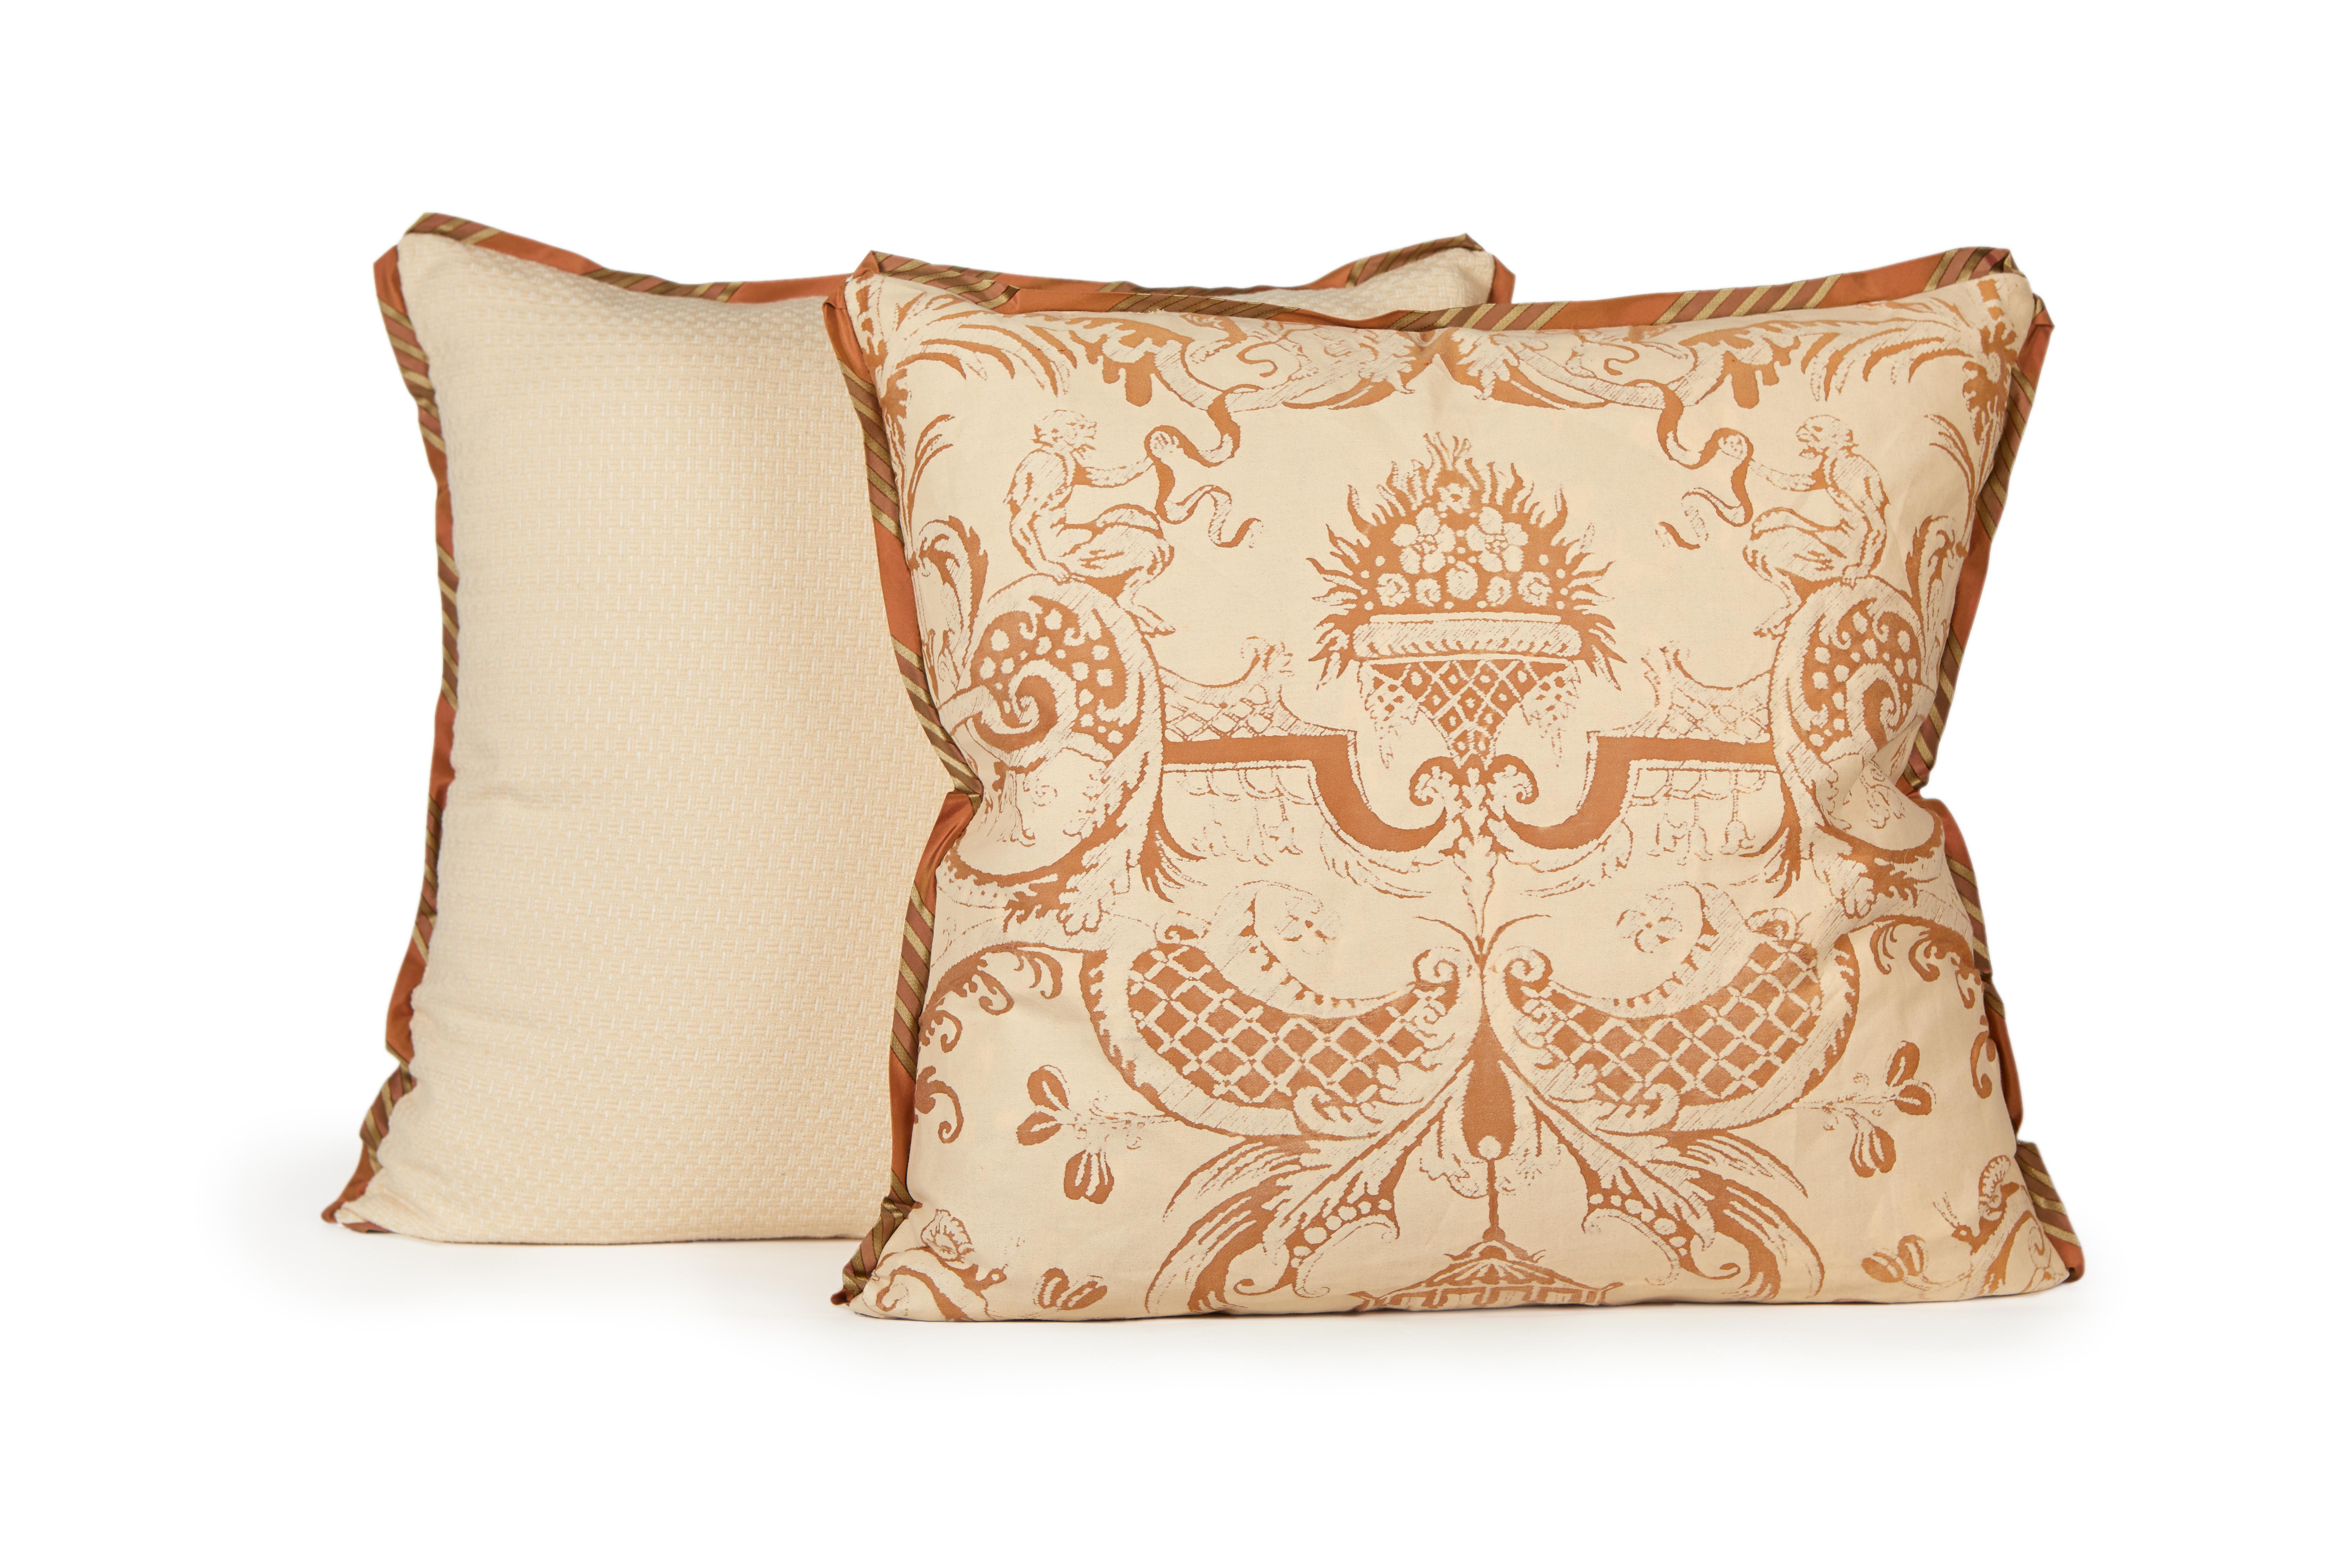 Baroque Pair of Fortuny Fabric Cushions in the Mazzarino Print in Tan and Rust For Sale